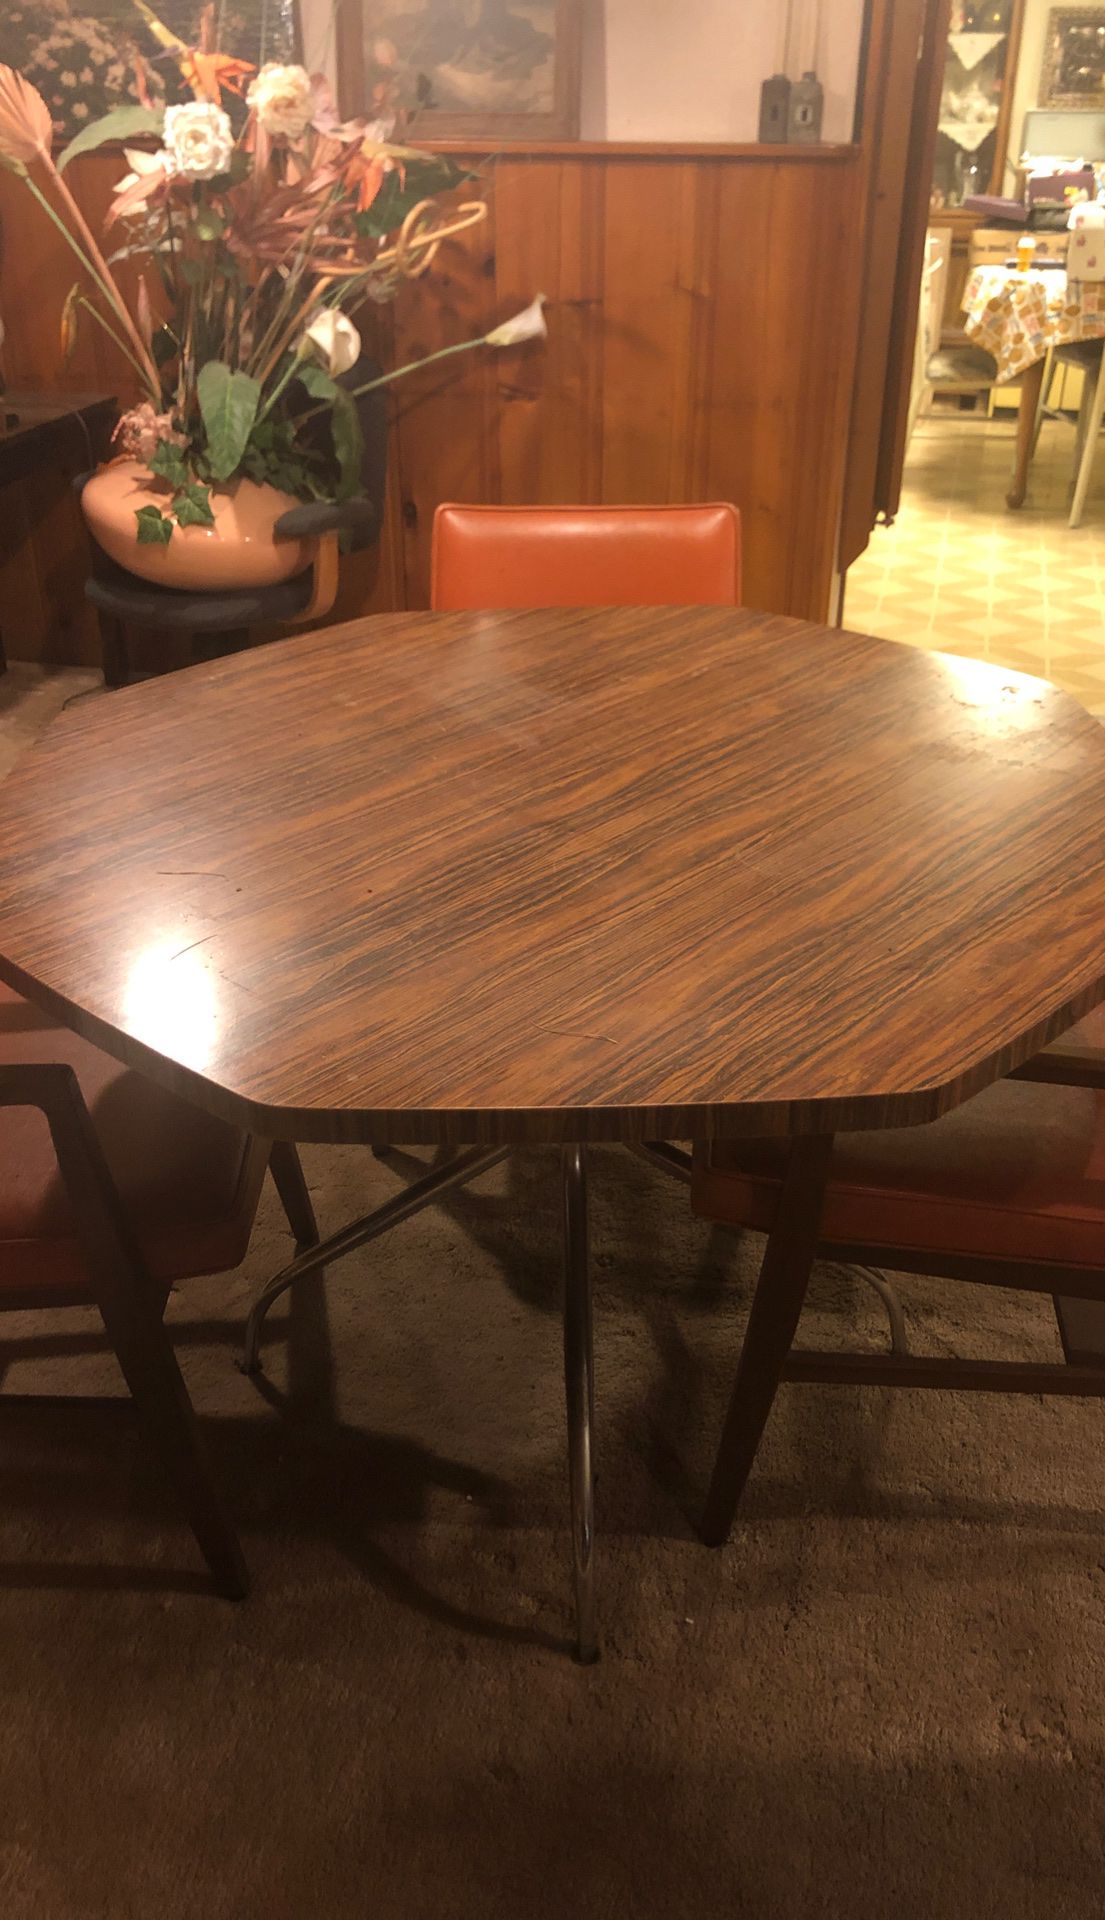 Kitchen table with three chairs